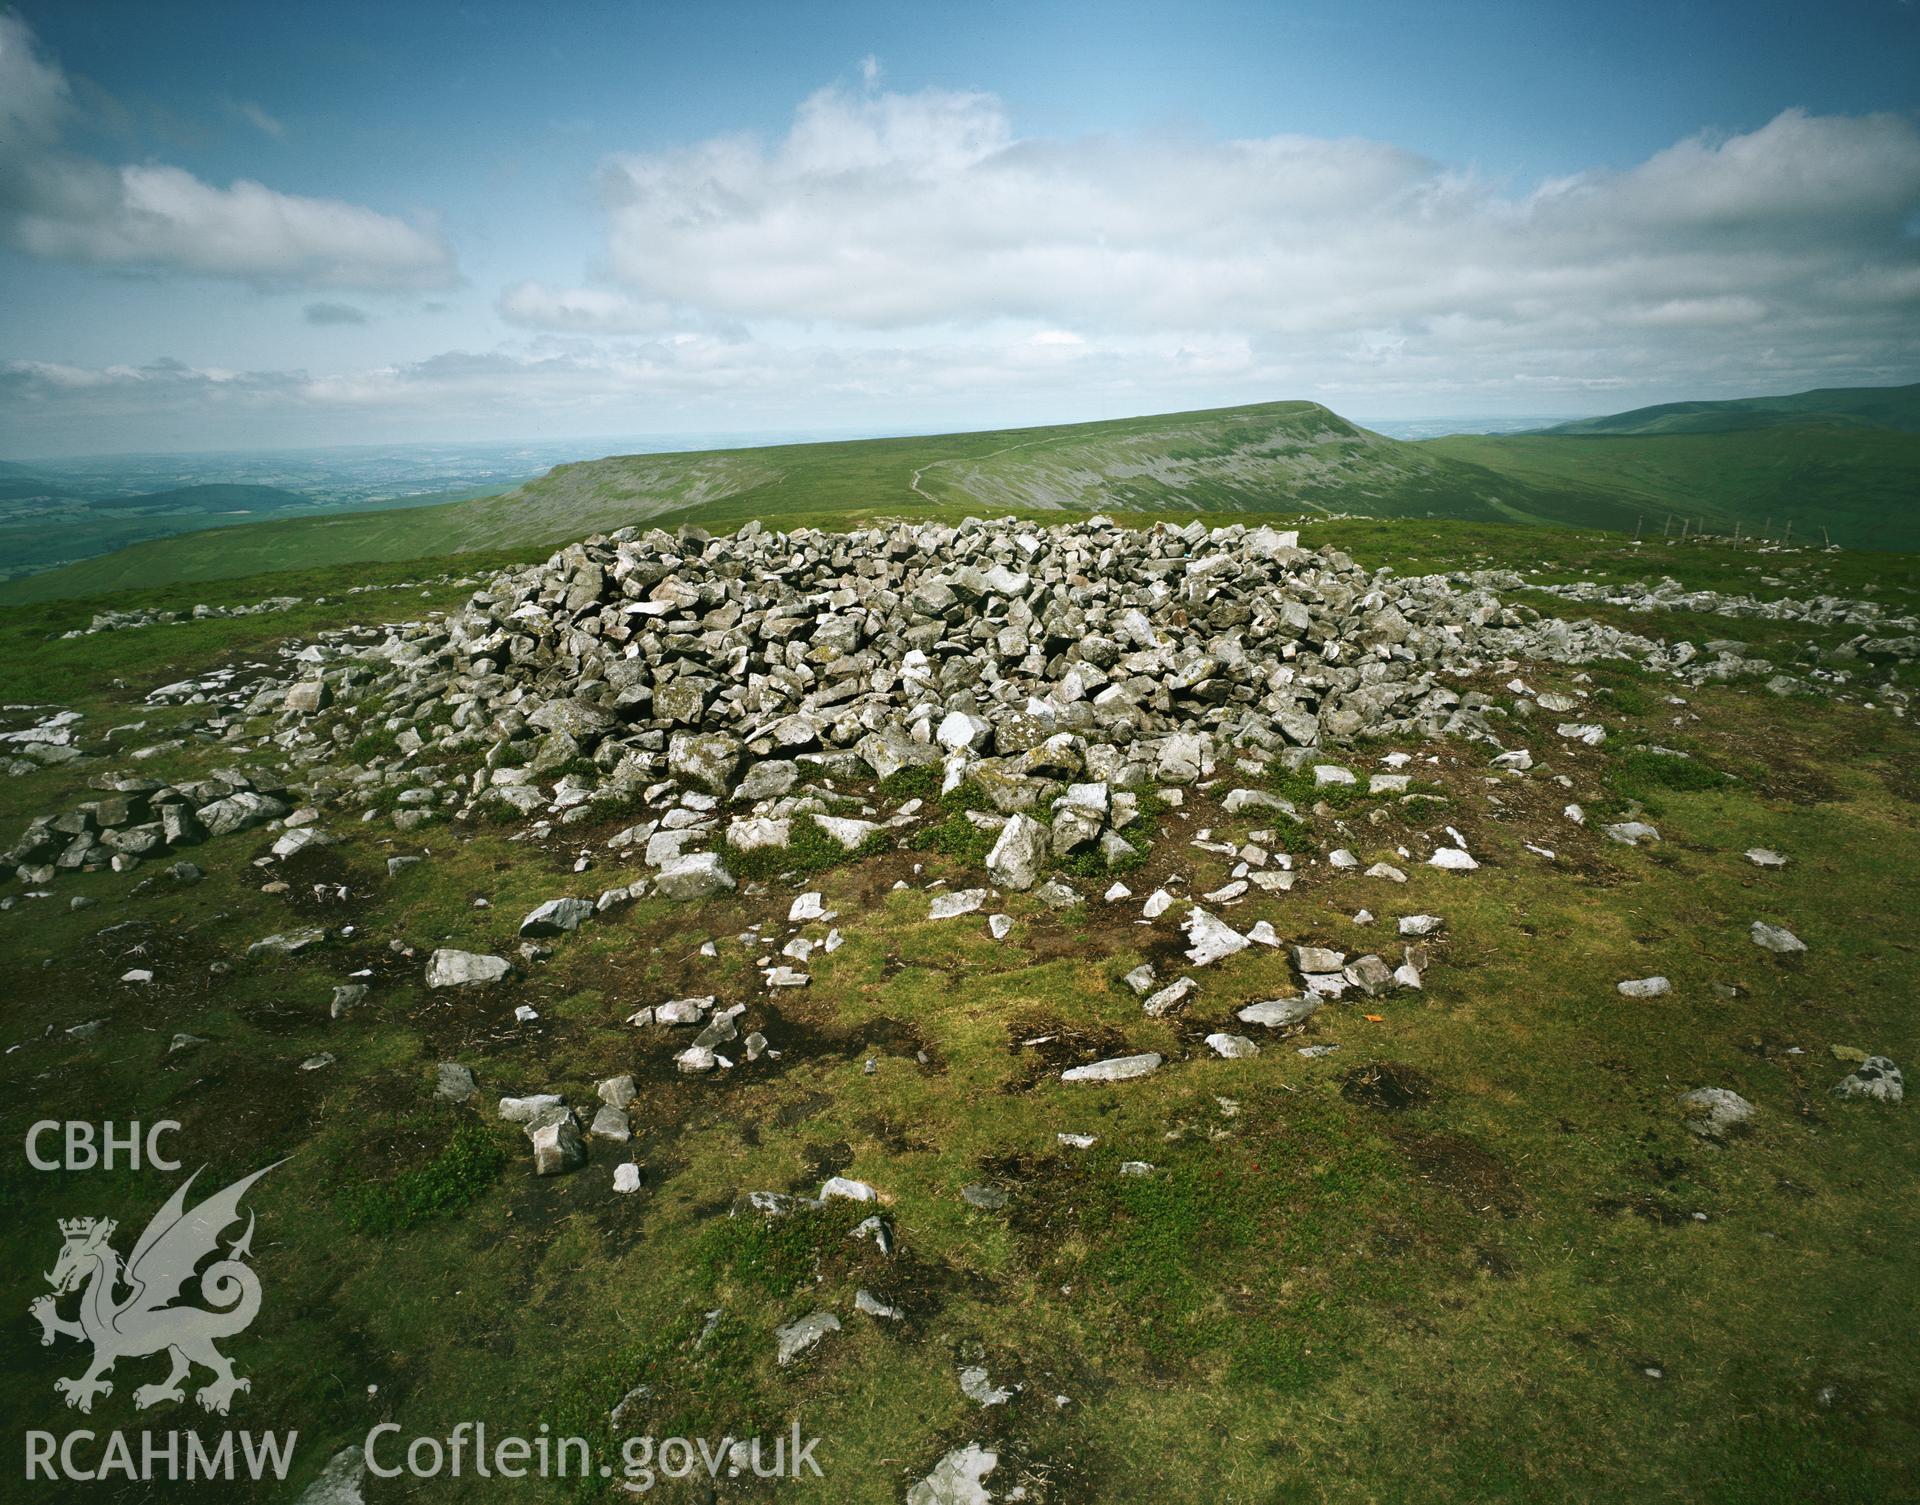 RCAHMW colour transparency showing Pen Cerrig Calch Cairn, taken by RCAHMW 1981